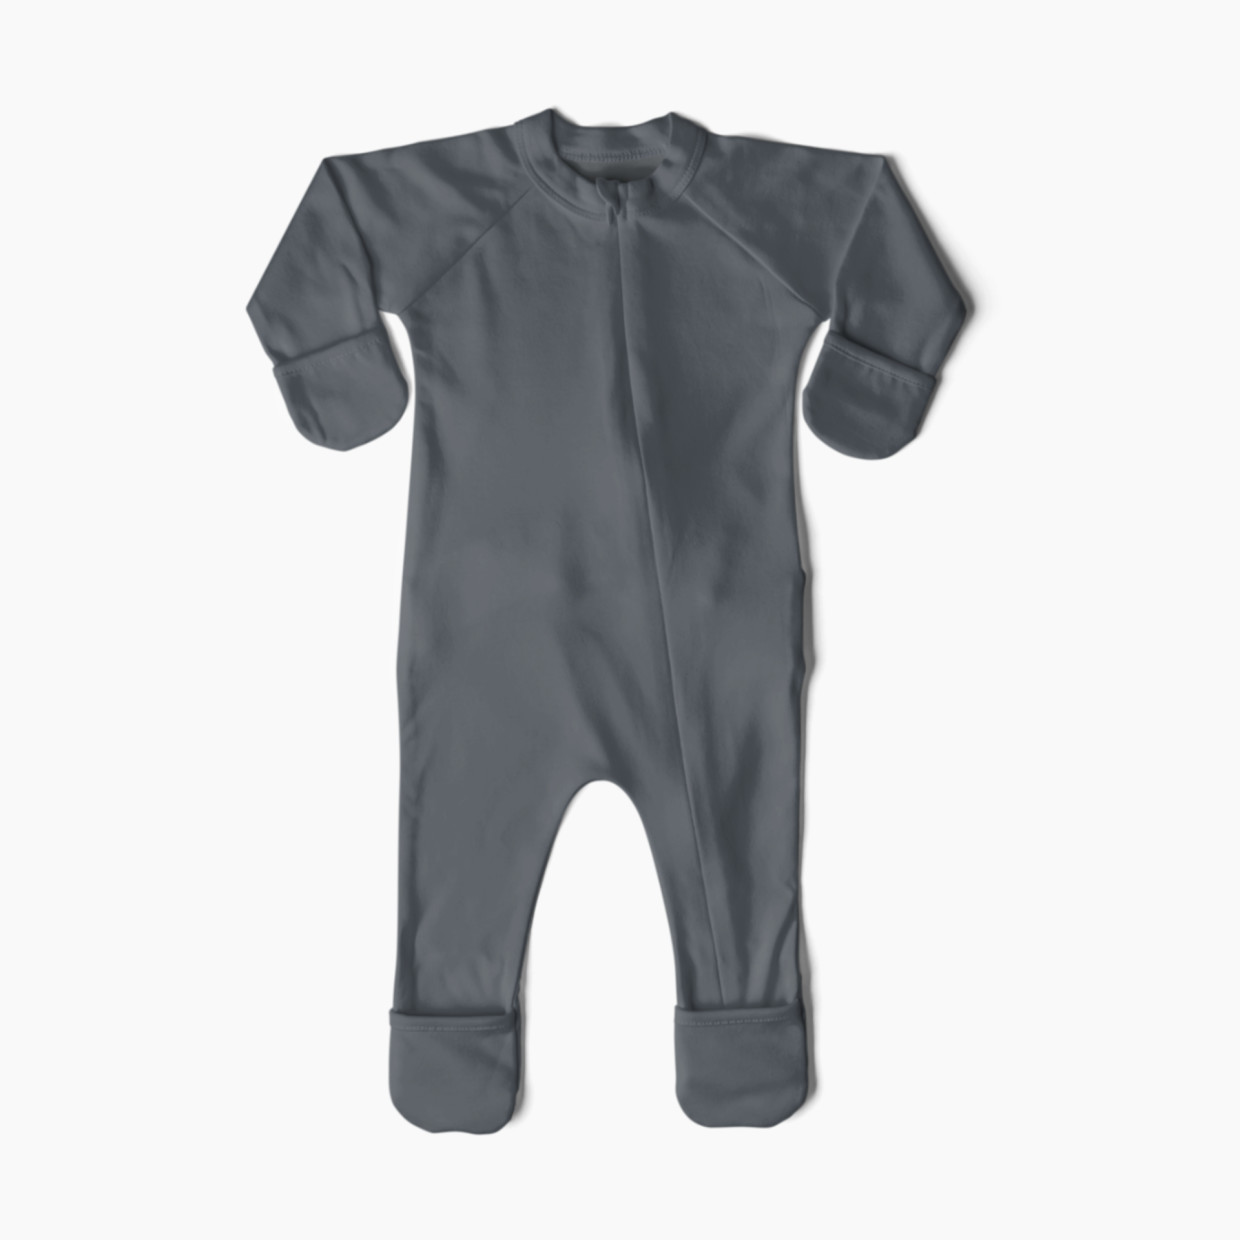 Goumi Kids Grow With You Footie - Loose Fit - Midnight, 3-6 M.